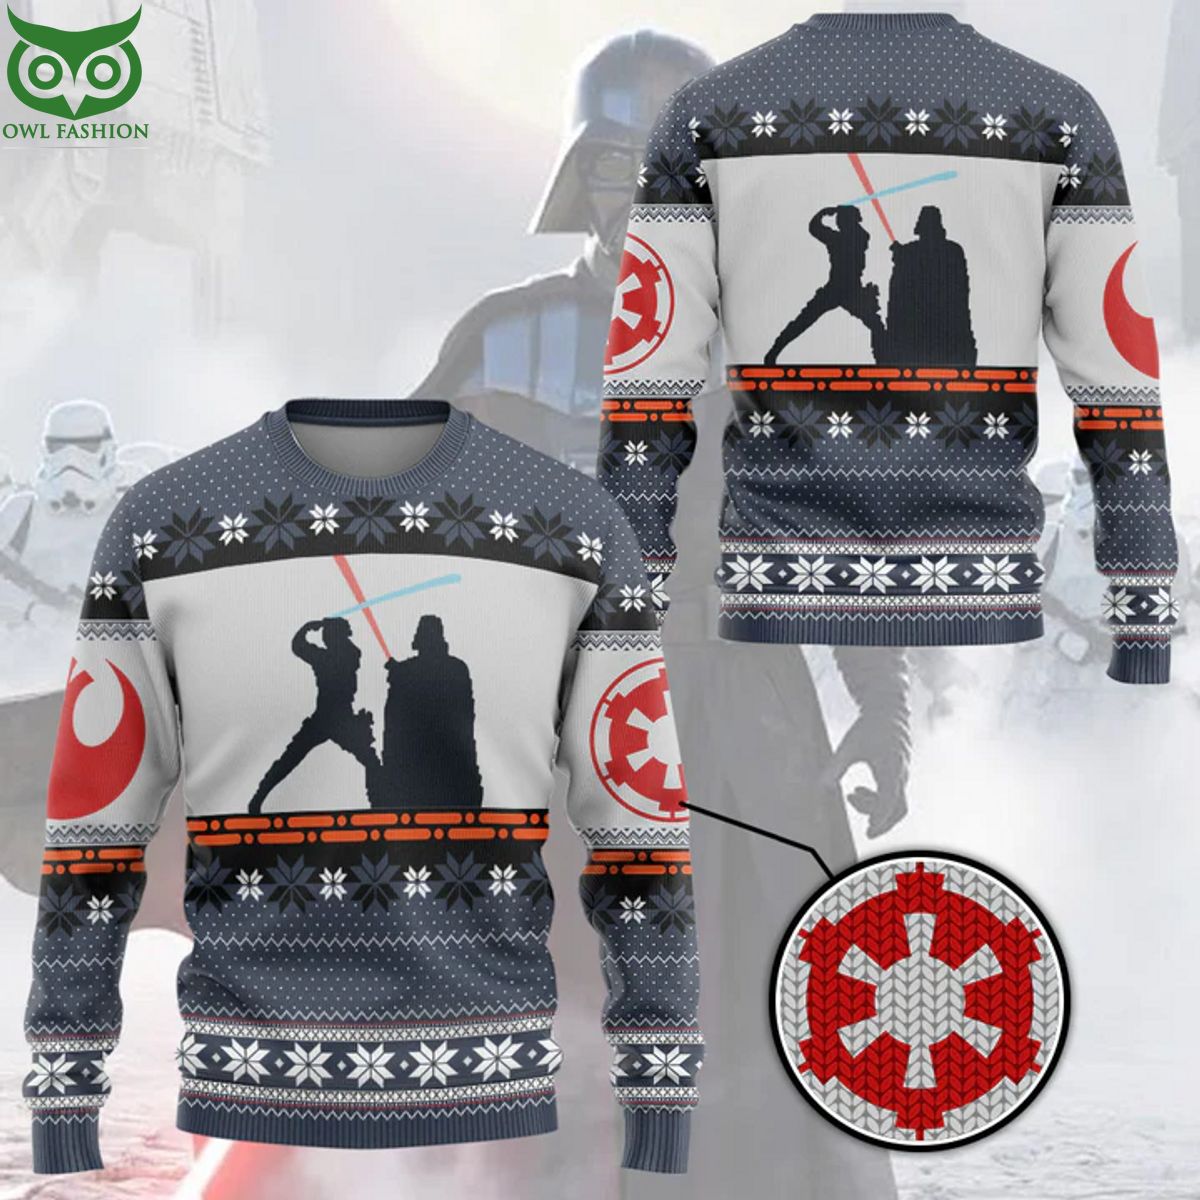 Gearhumans 3D Star Wars Darth Vader Christmas Ugly Sweater Out of the world